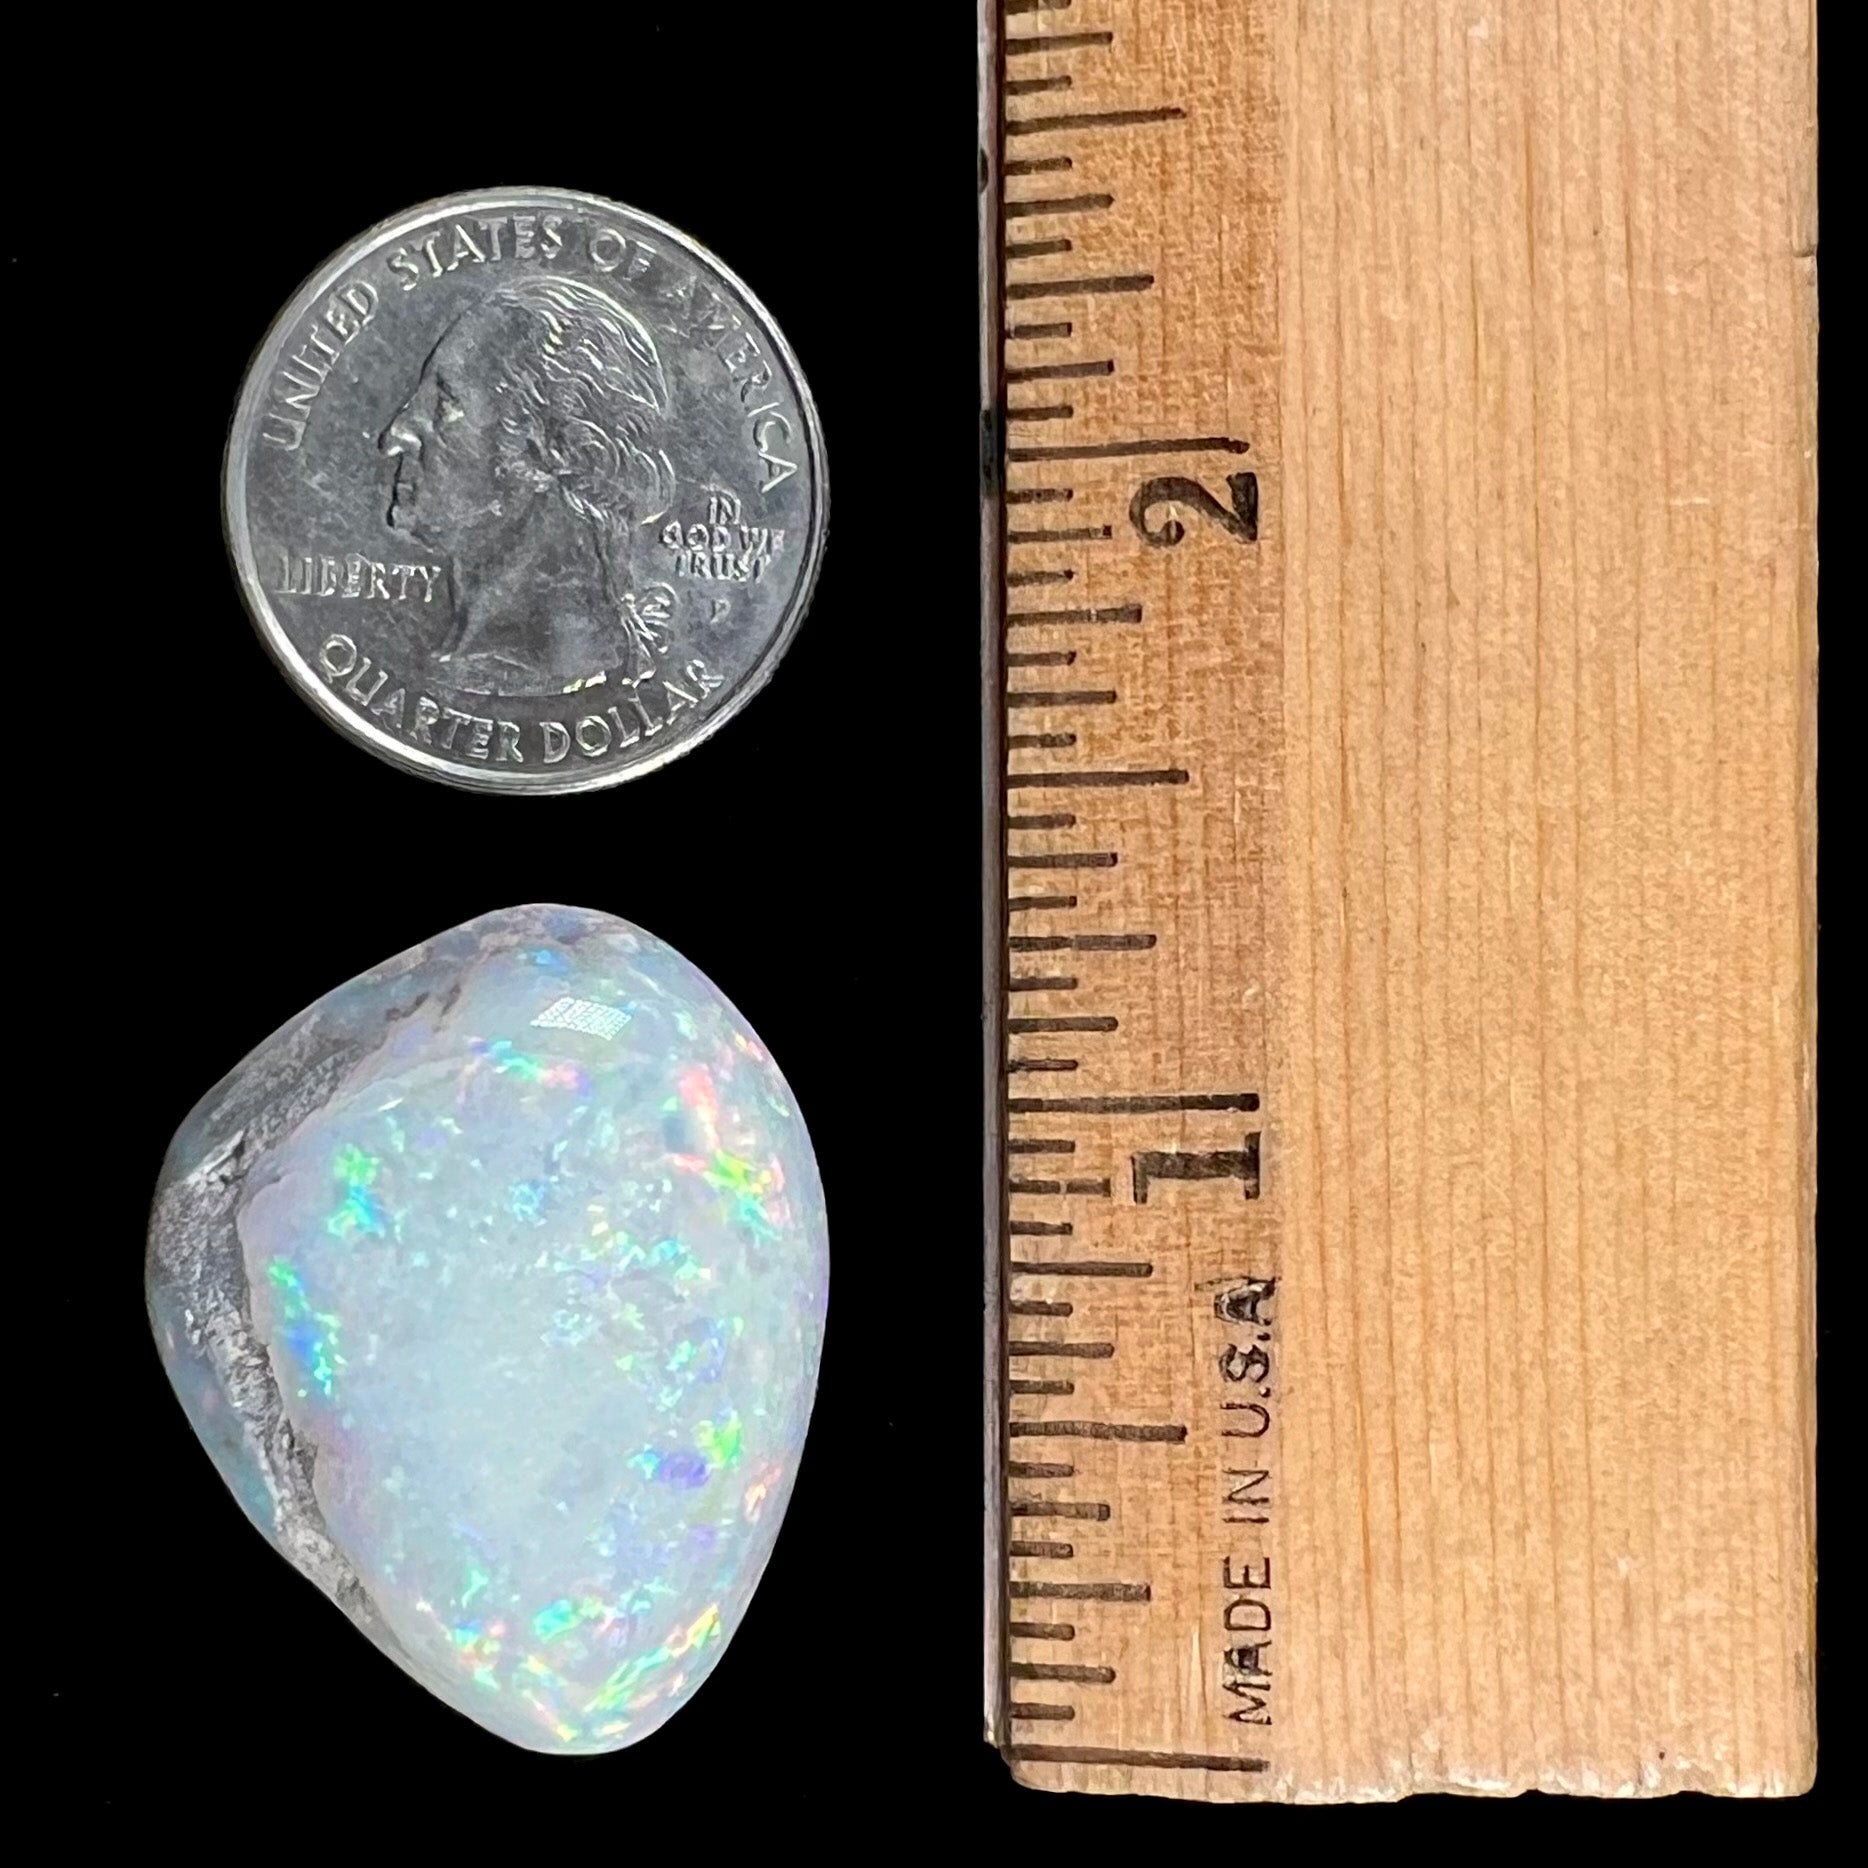 An opalized seashell fossil that displays play of color.  The full color spectrum is visible, including red, green, blue, and purple.